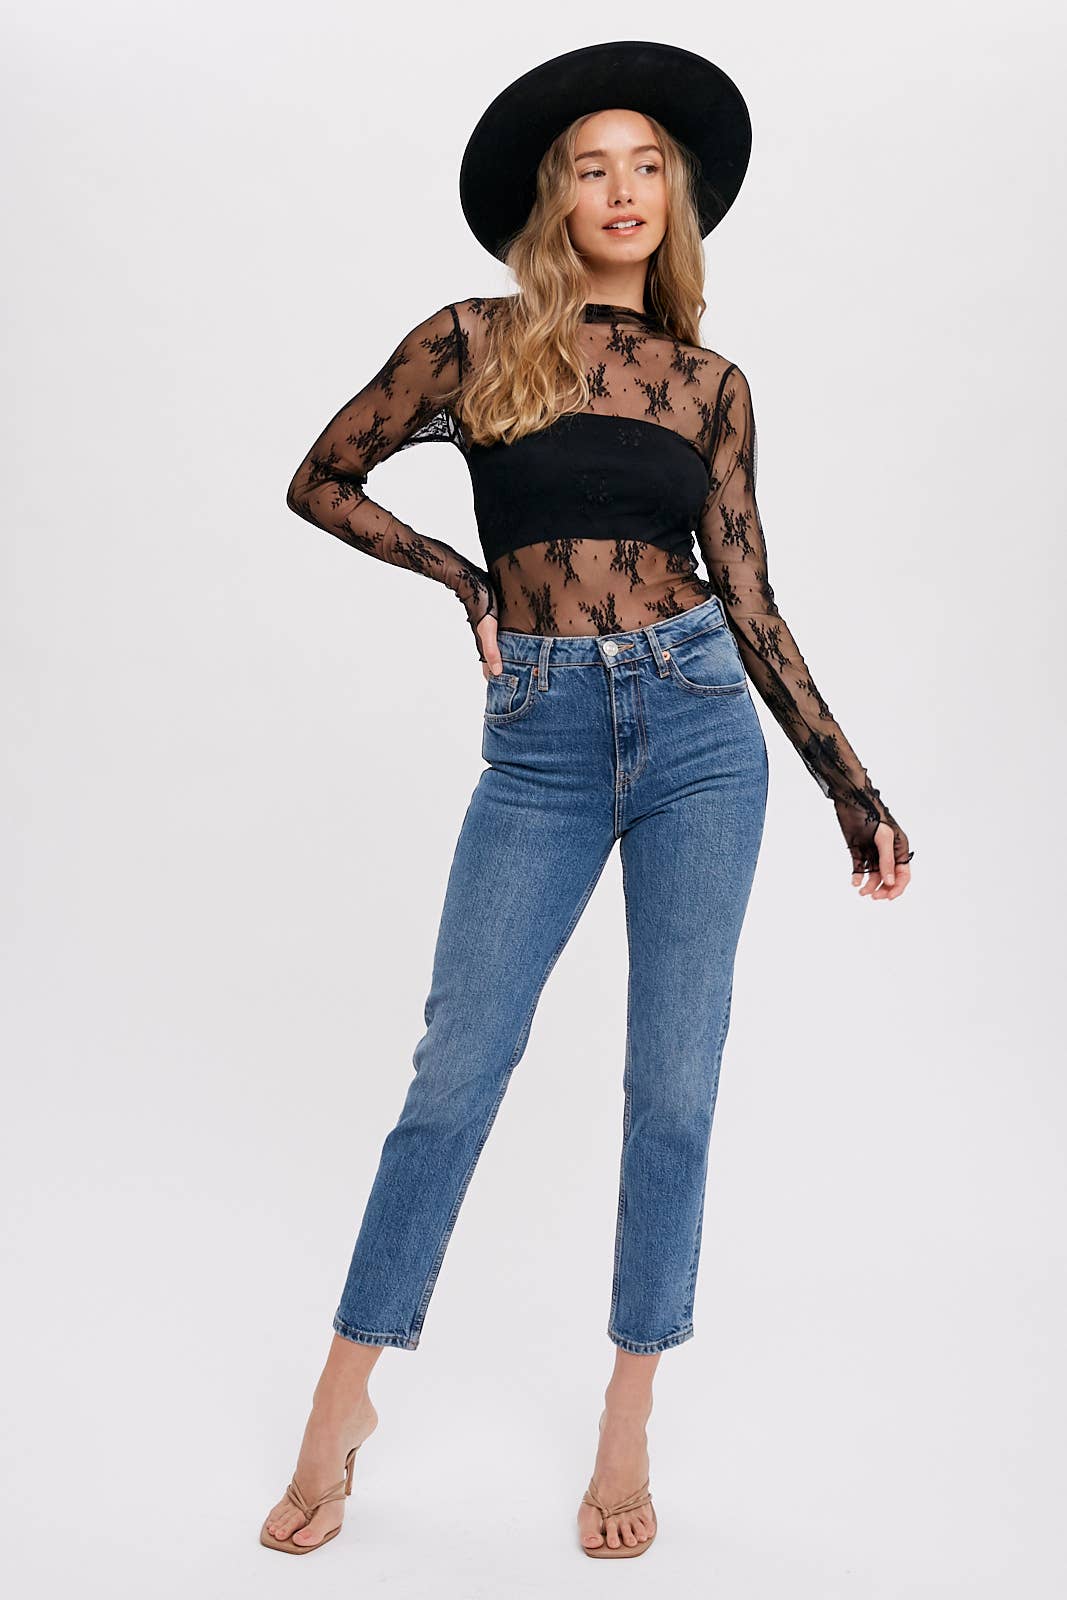 Lace mesh layering top